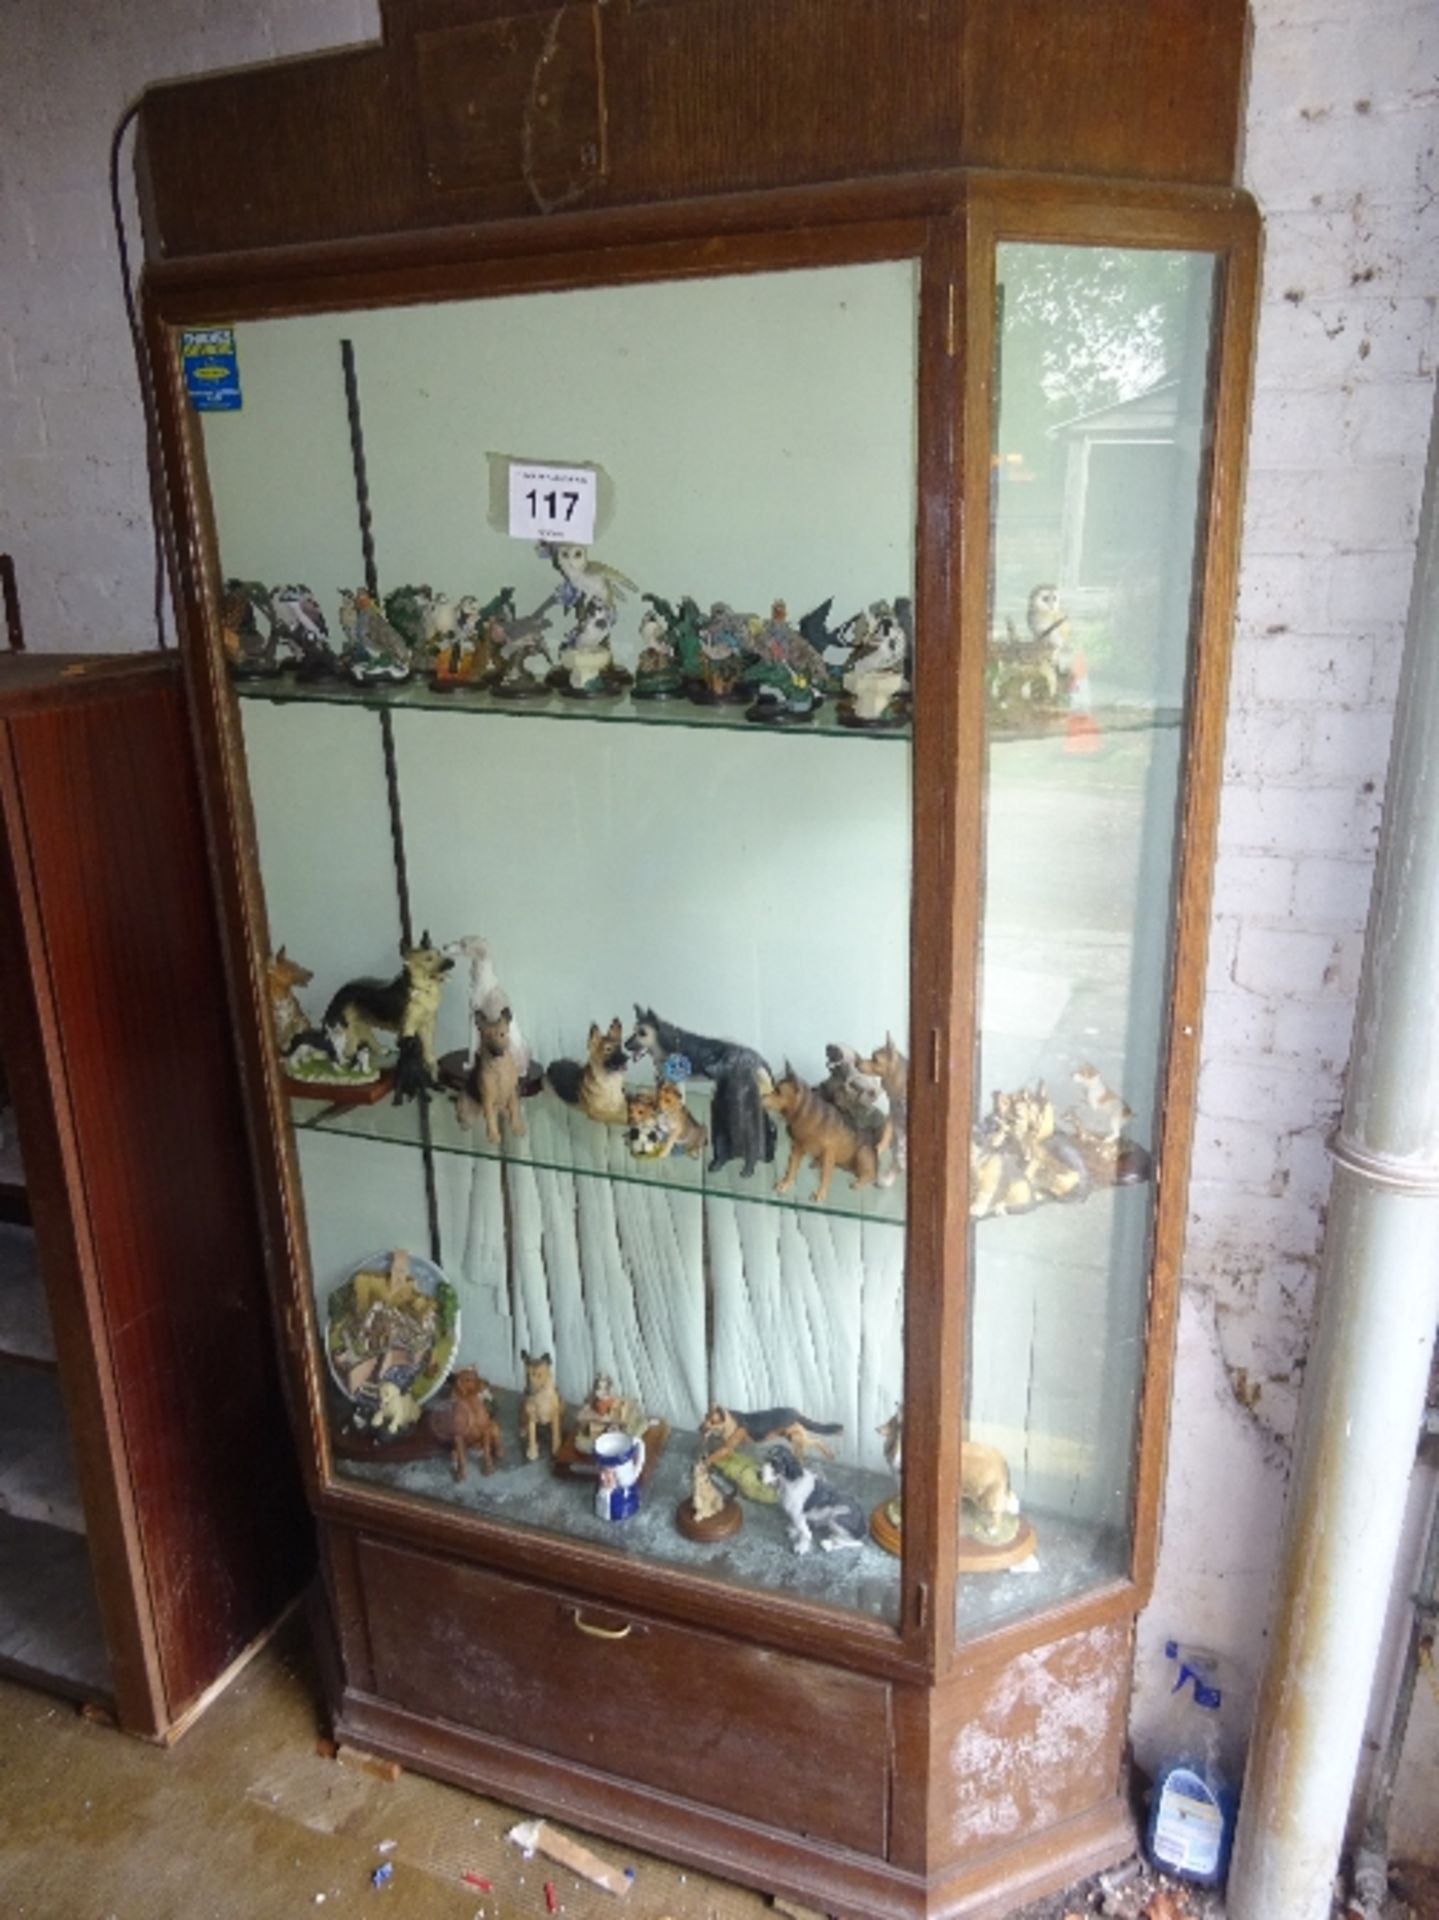 Display cabinet and contents - dogs and birds